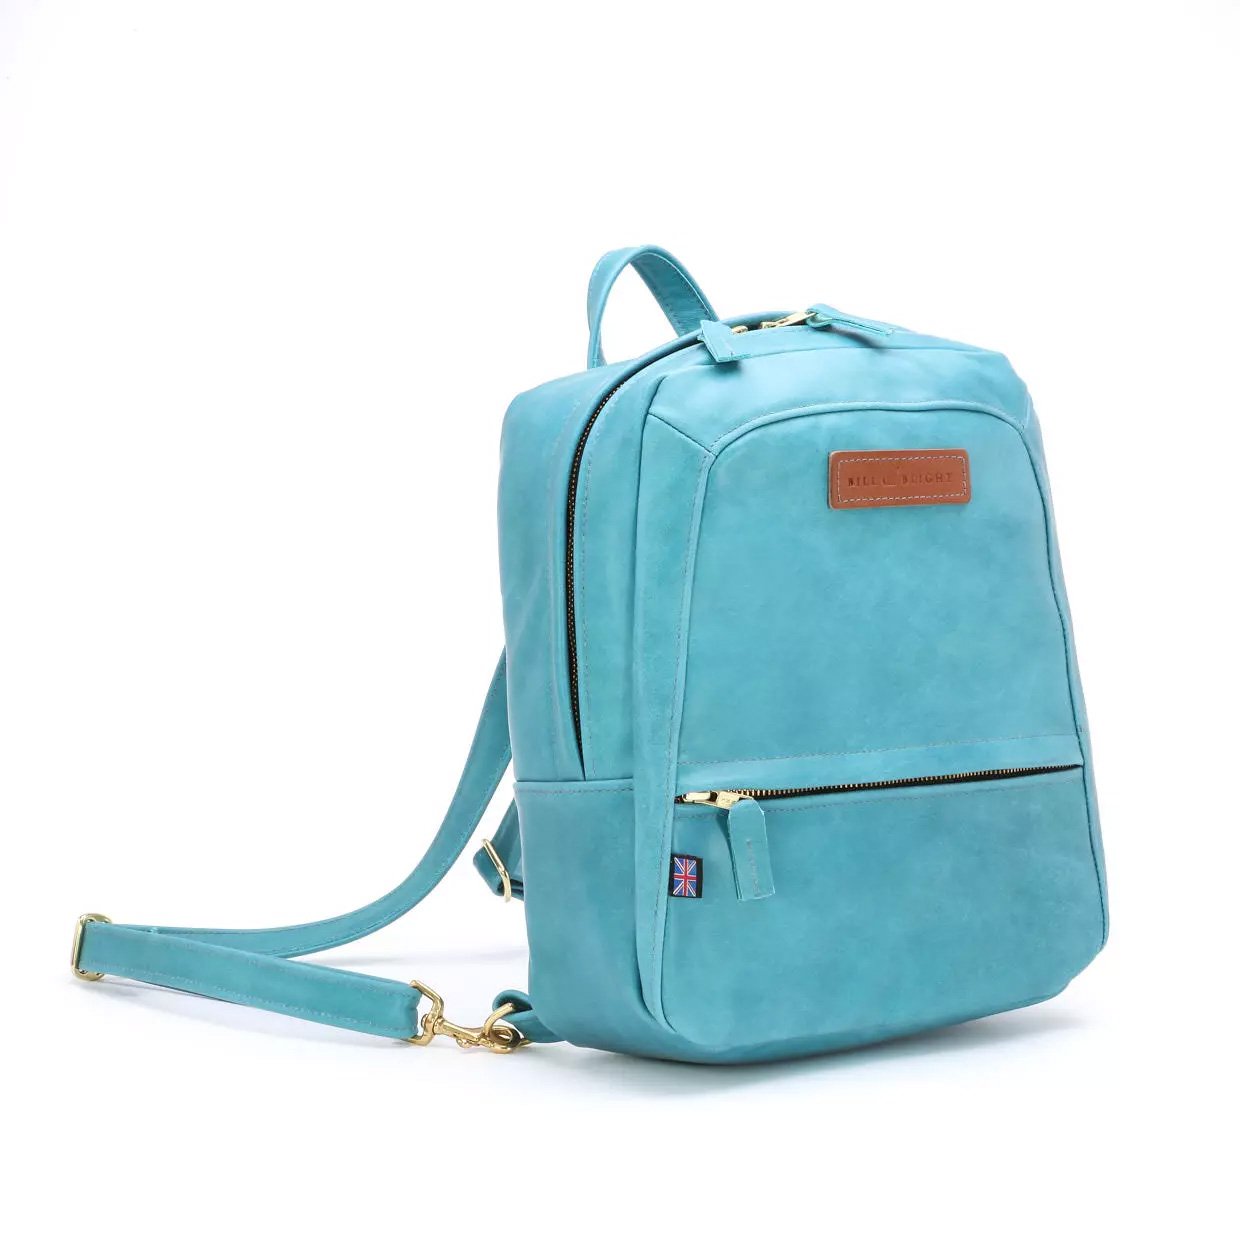 Blue ladies backpack product image